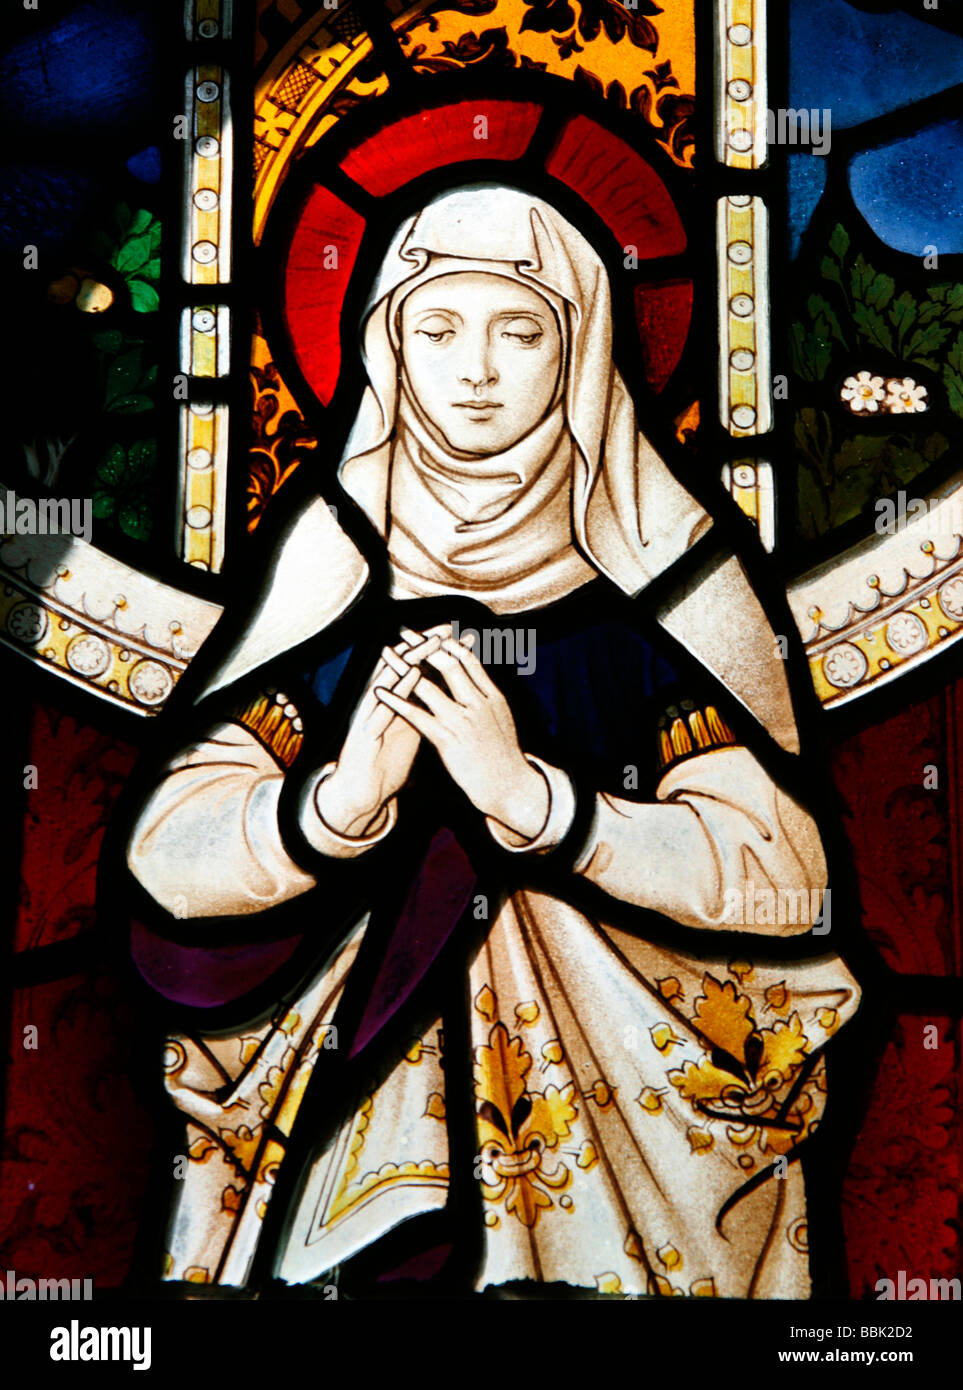 A Stained Glass Window Depicting Saint Anne Stock Photo - Alamy